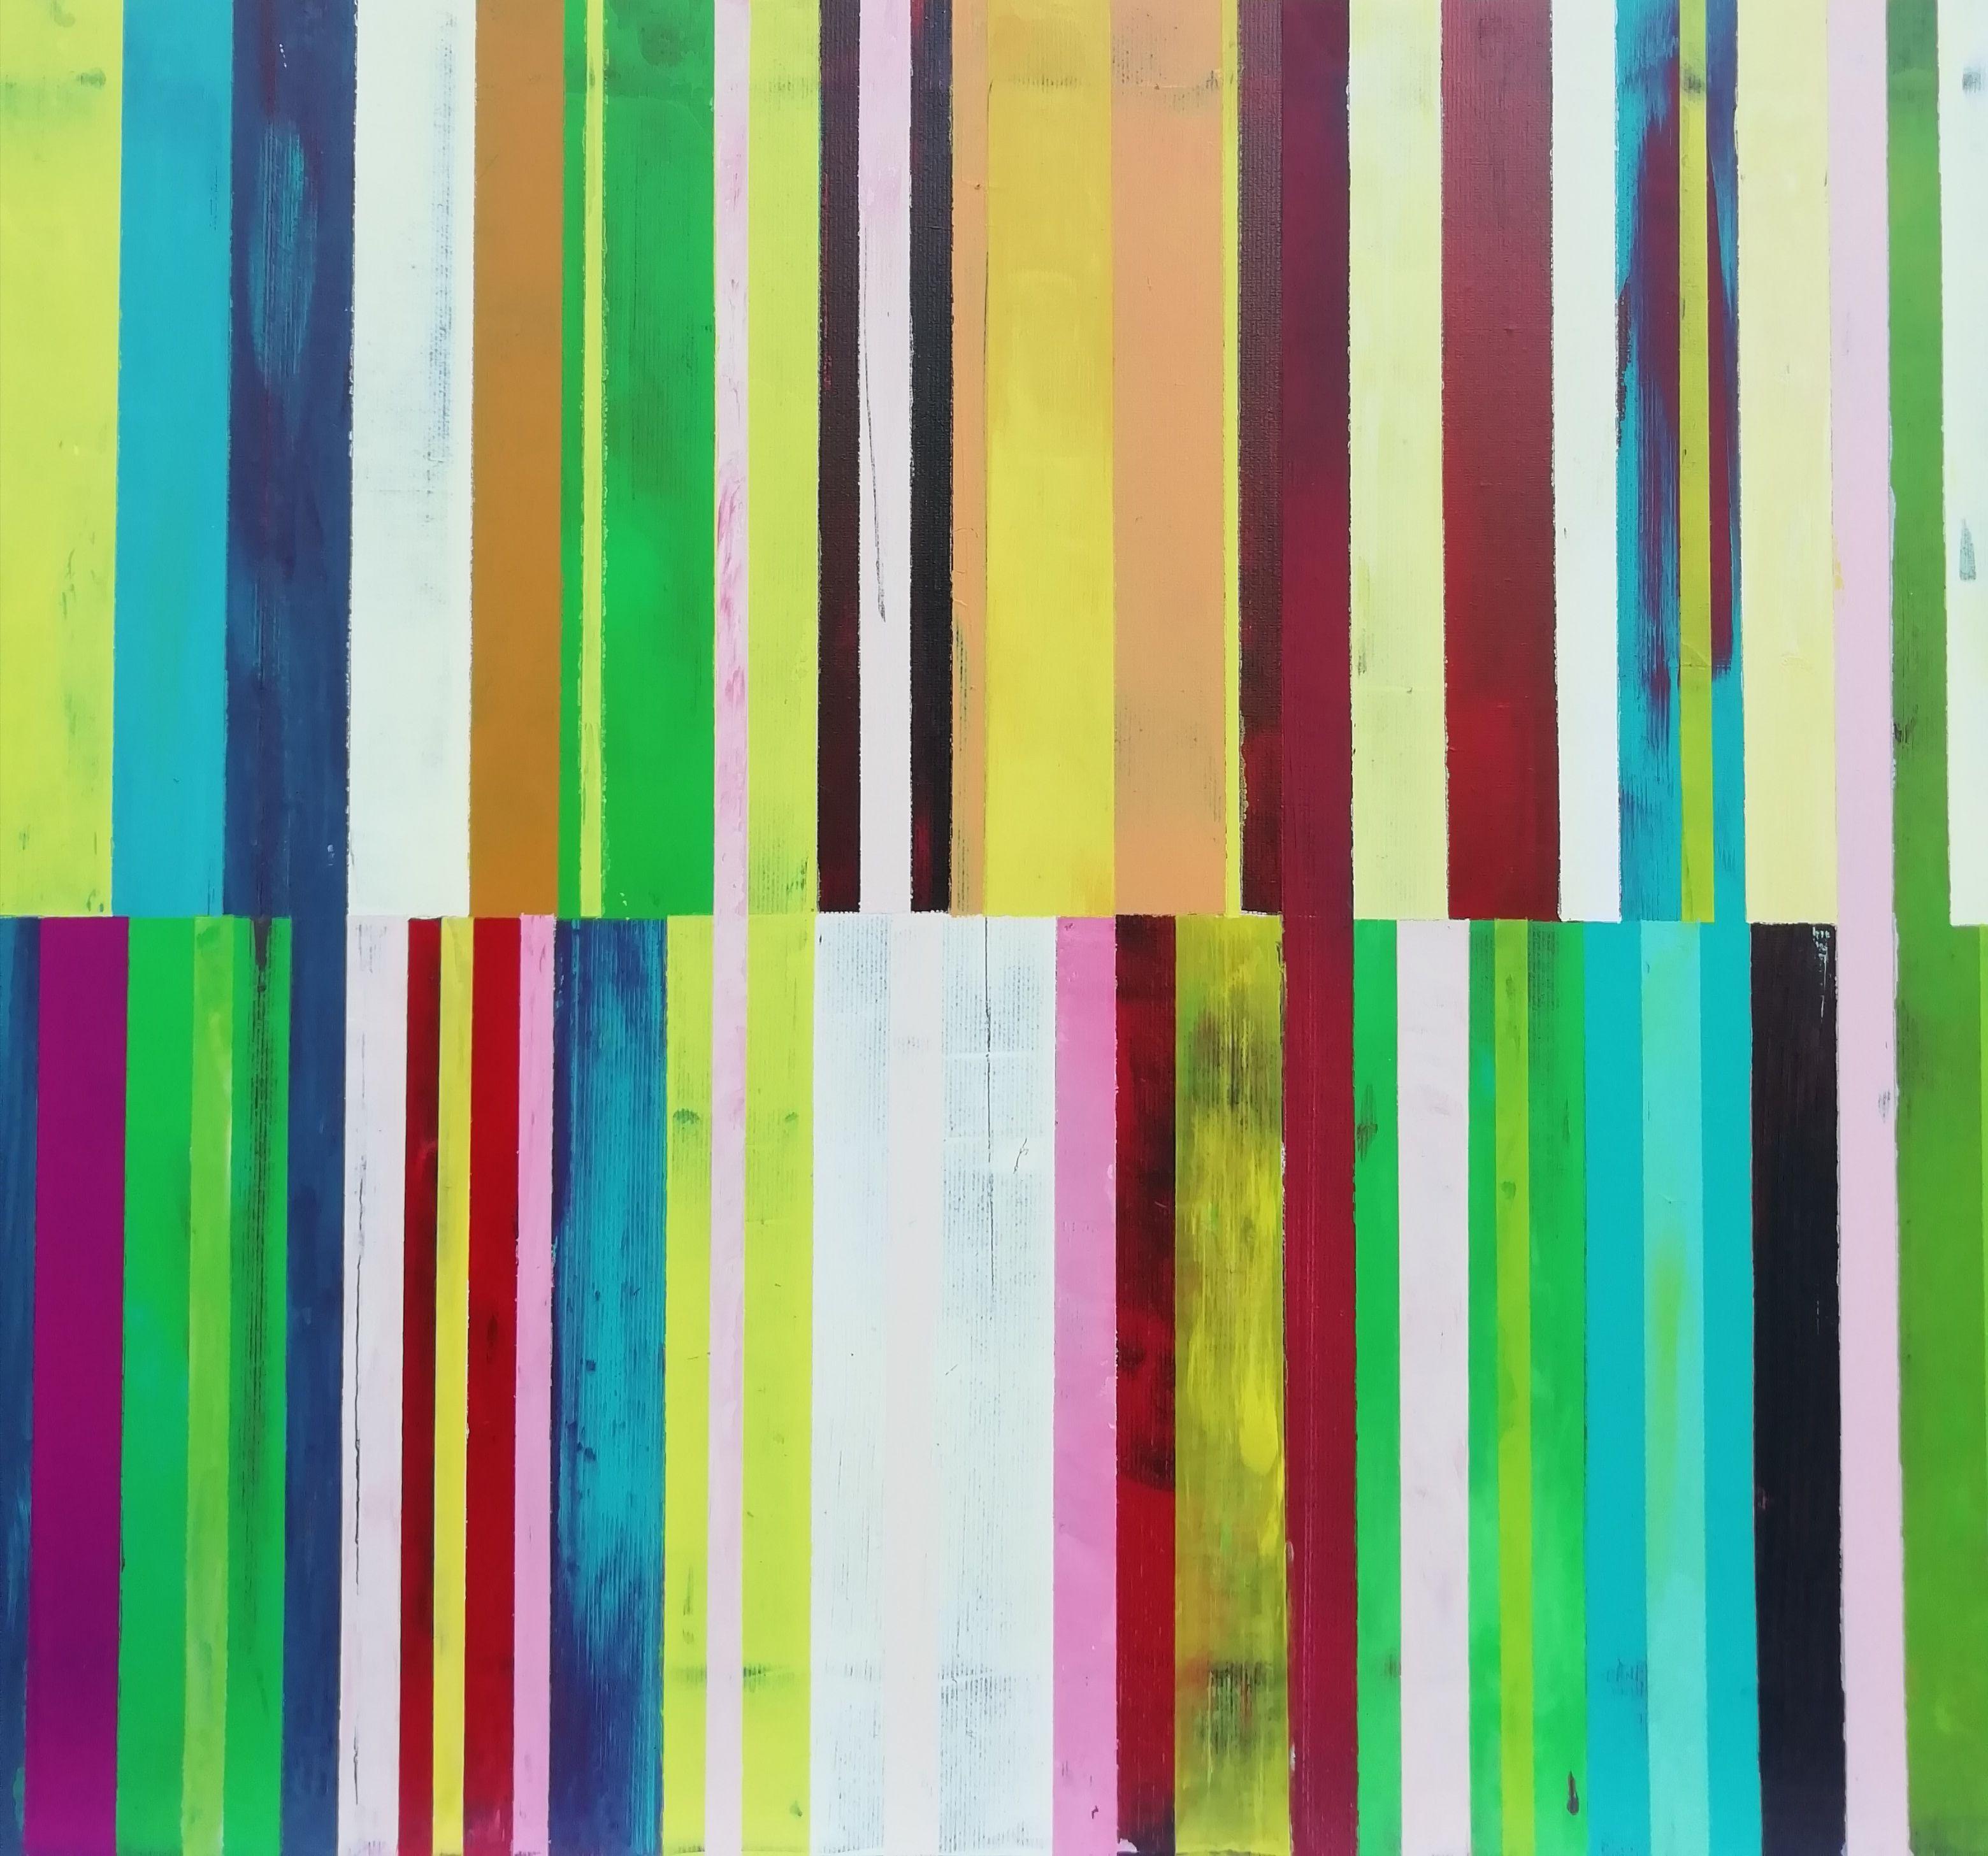 Acrylic on canvas. Signed back. Certificate of Autenticity. The sides are painted. Large painting. Shipping included.    The paintings of colored lines, wid or narrow, appear as a turning point in my most recent work. Contrasts, calm harmony,